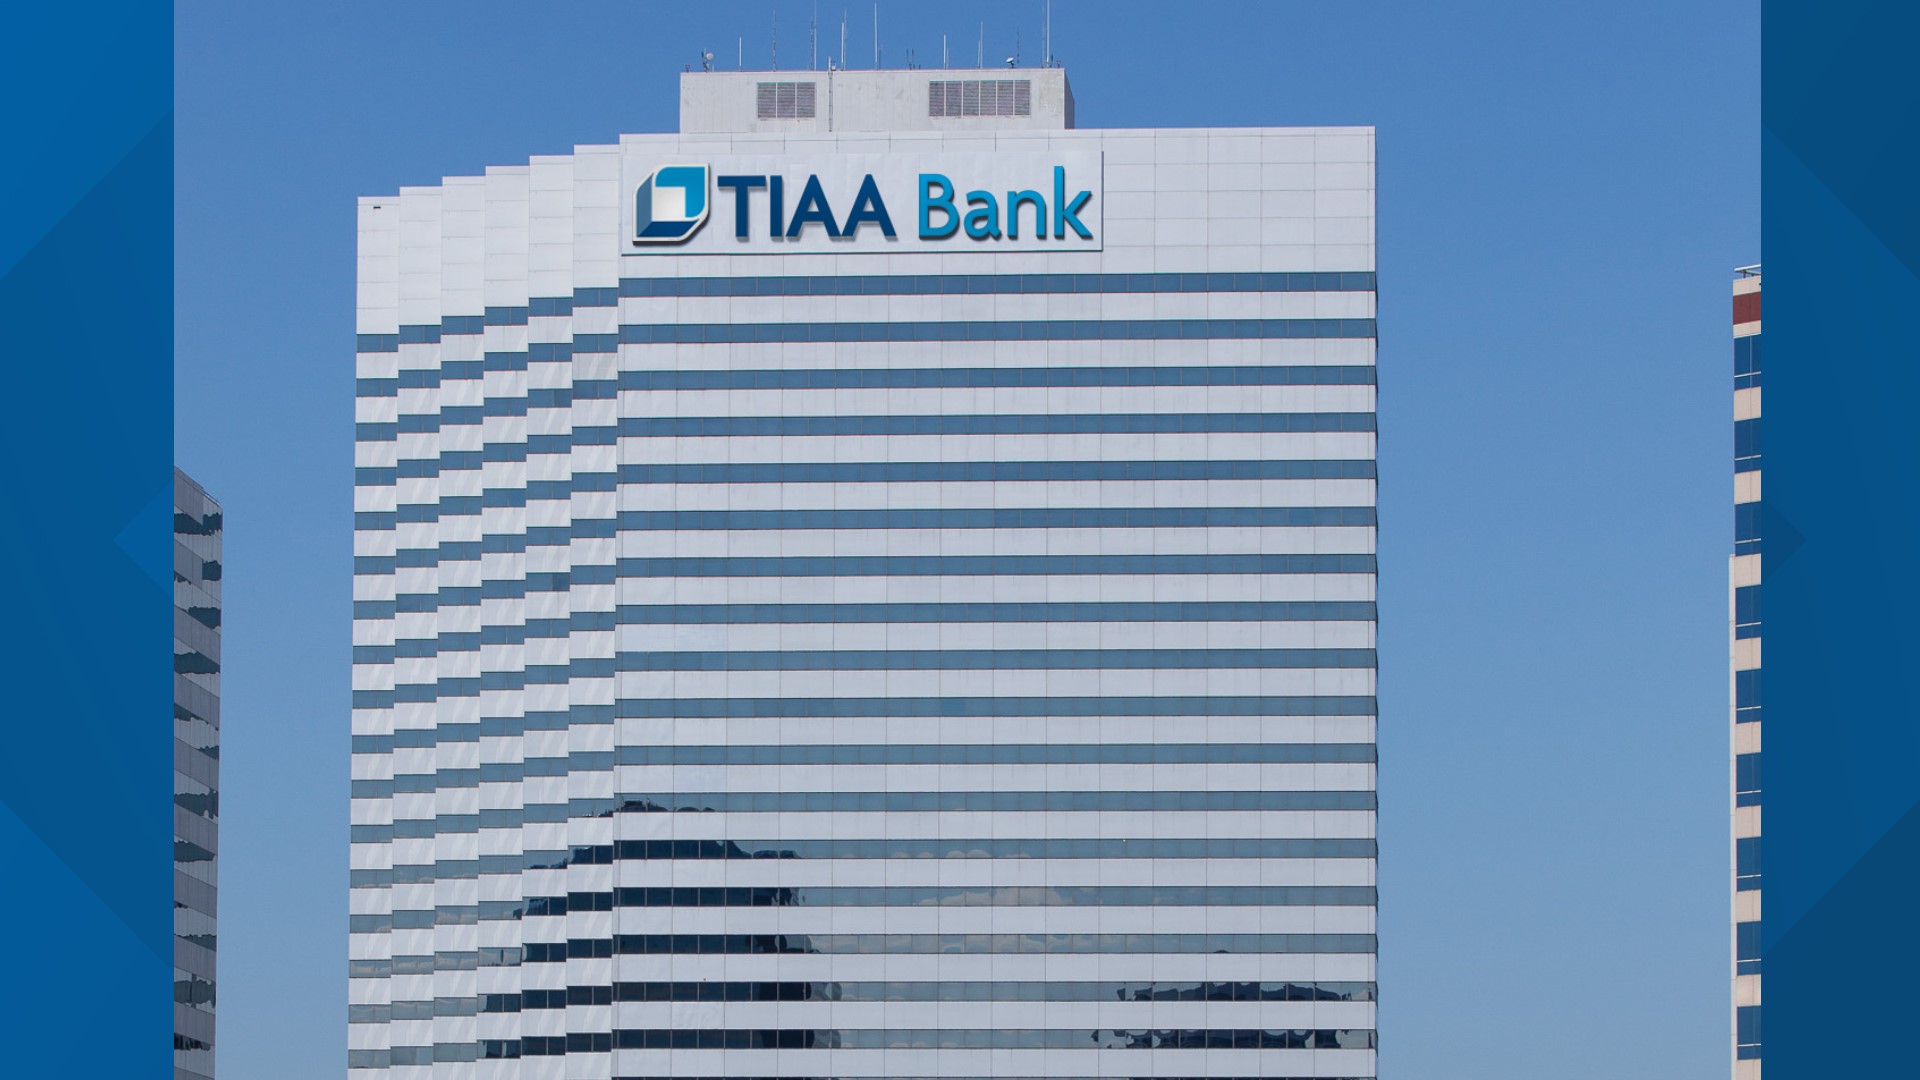 TIAA Bank announces another round of layoffs